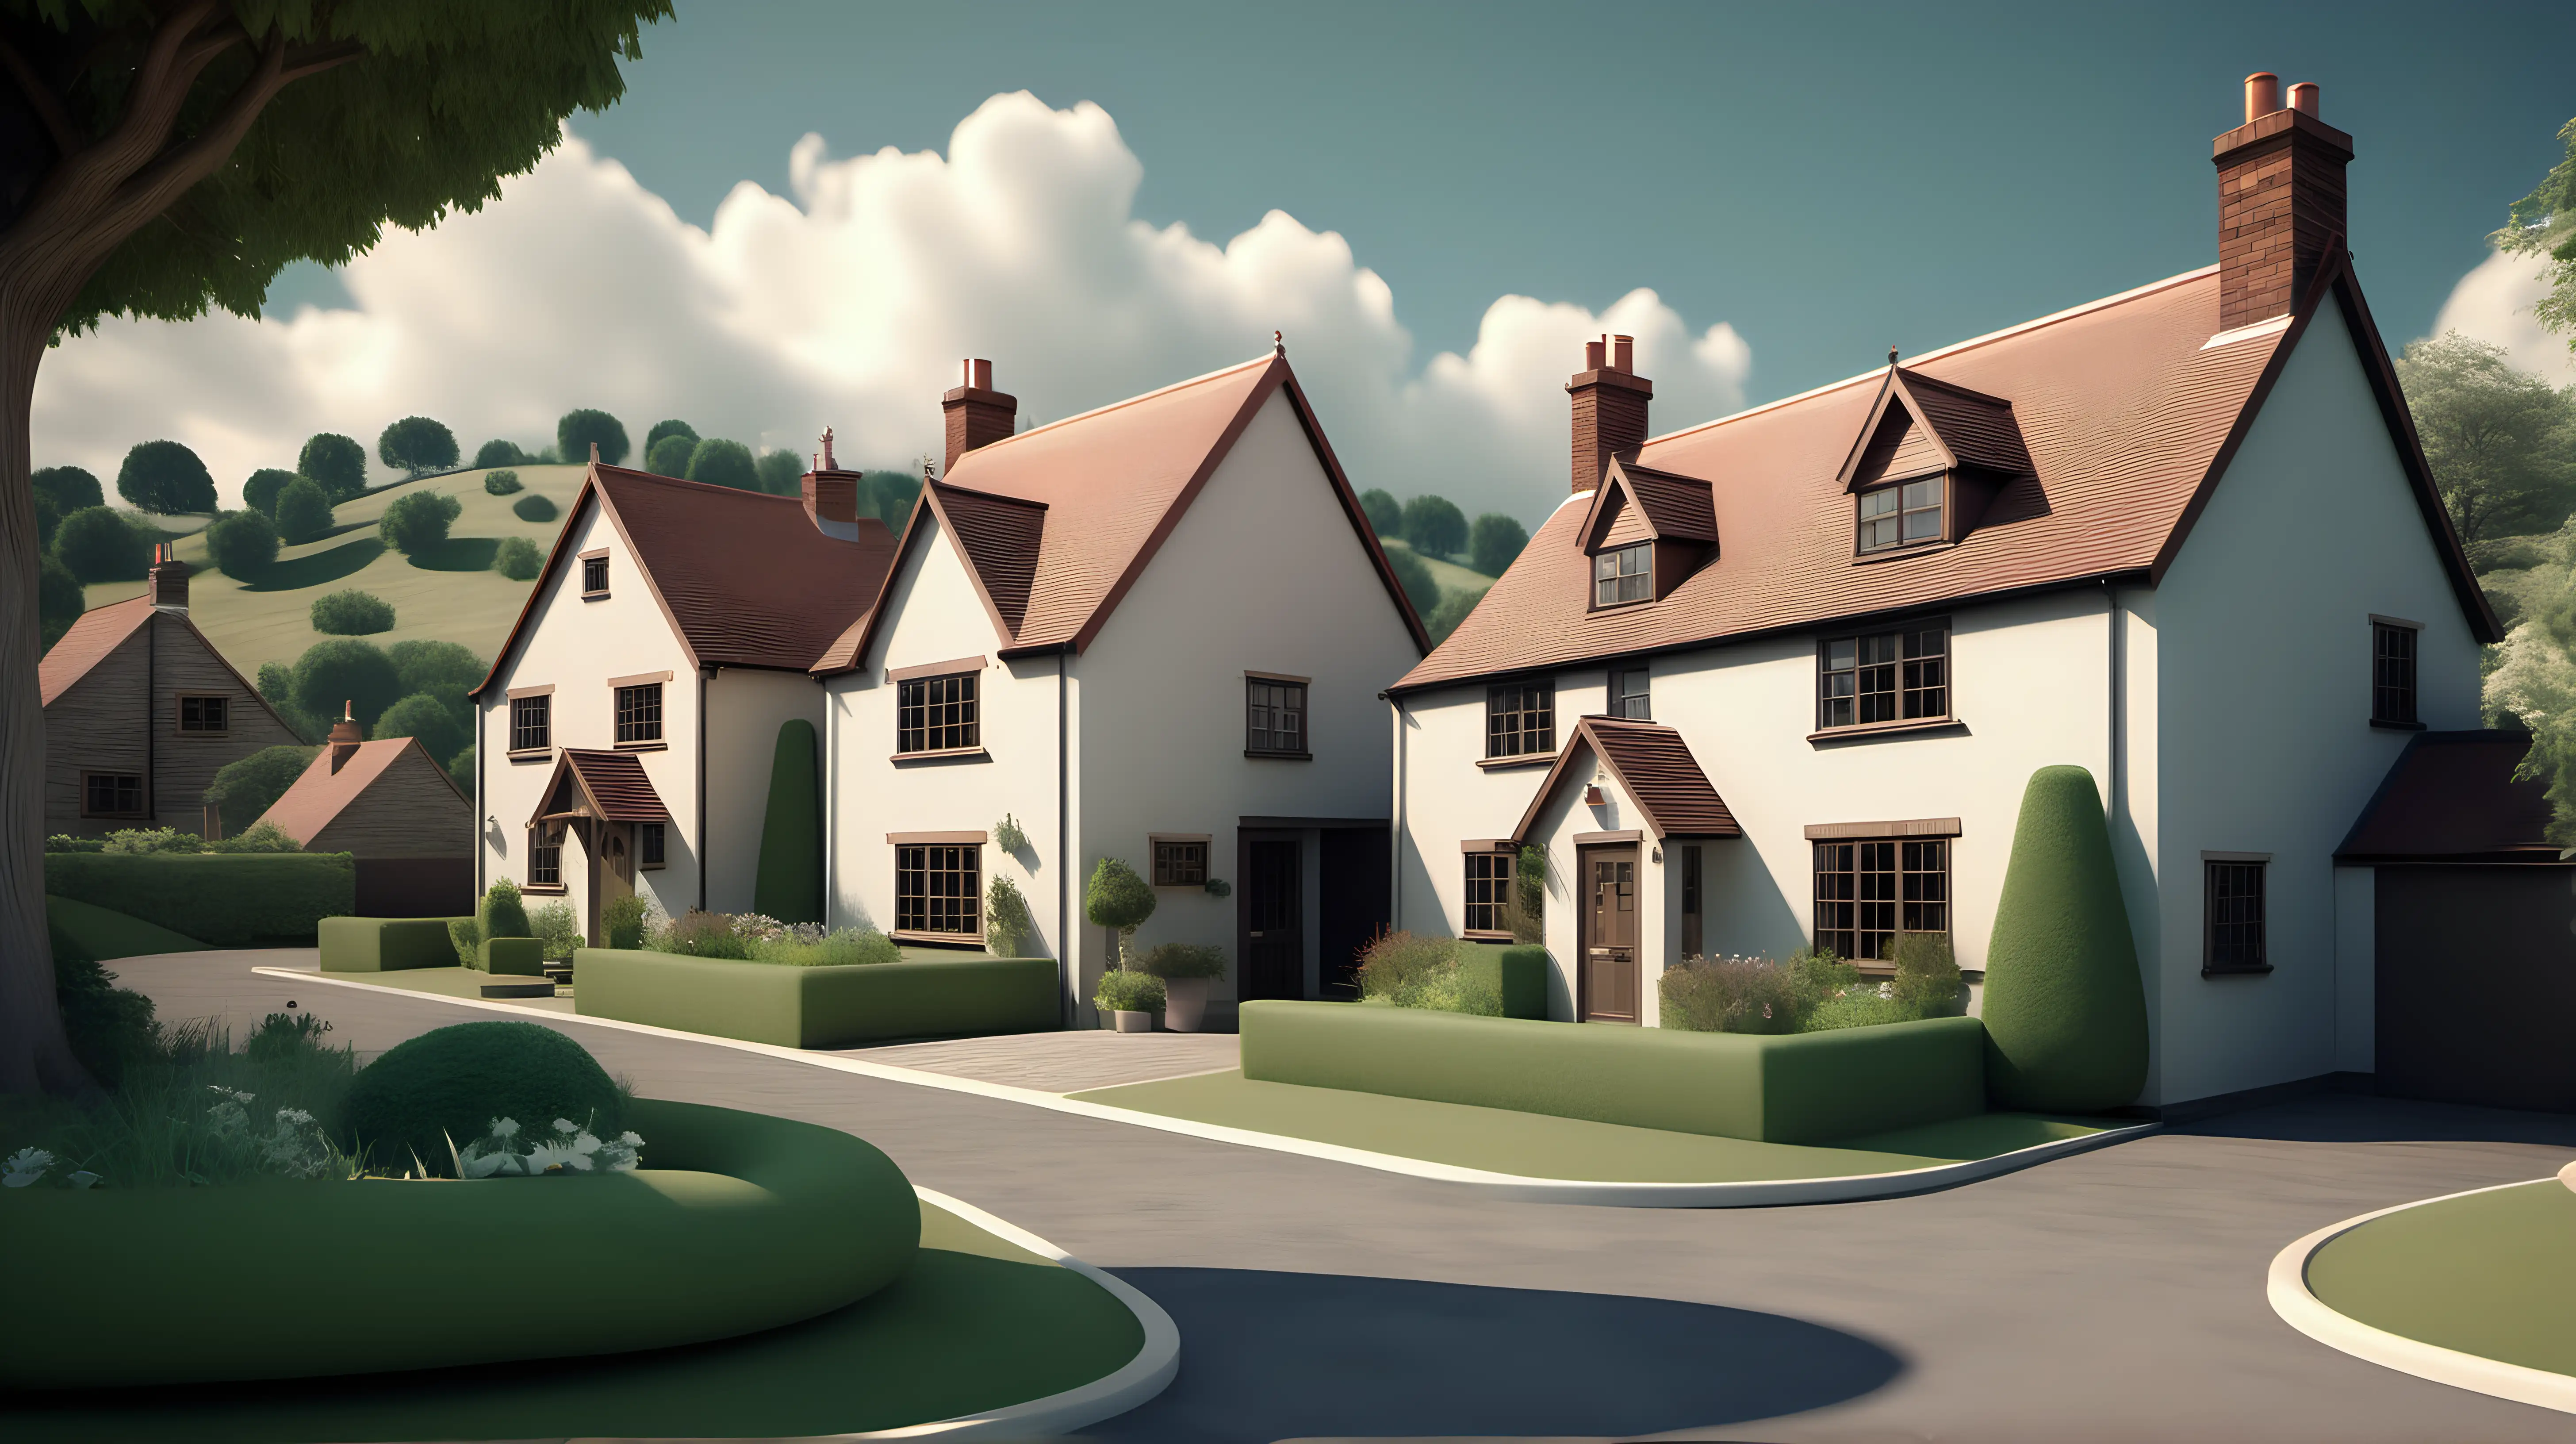 Detached house in a cute english village, hills in the background with trees. 3D render style.